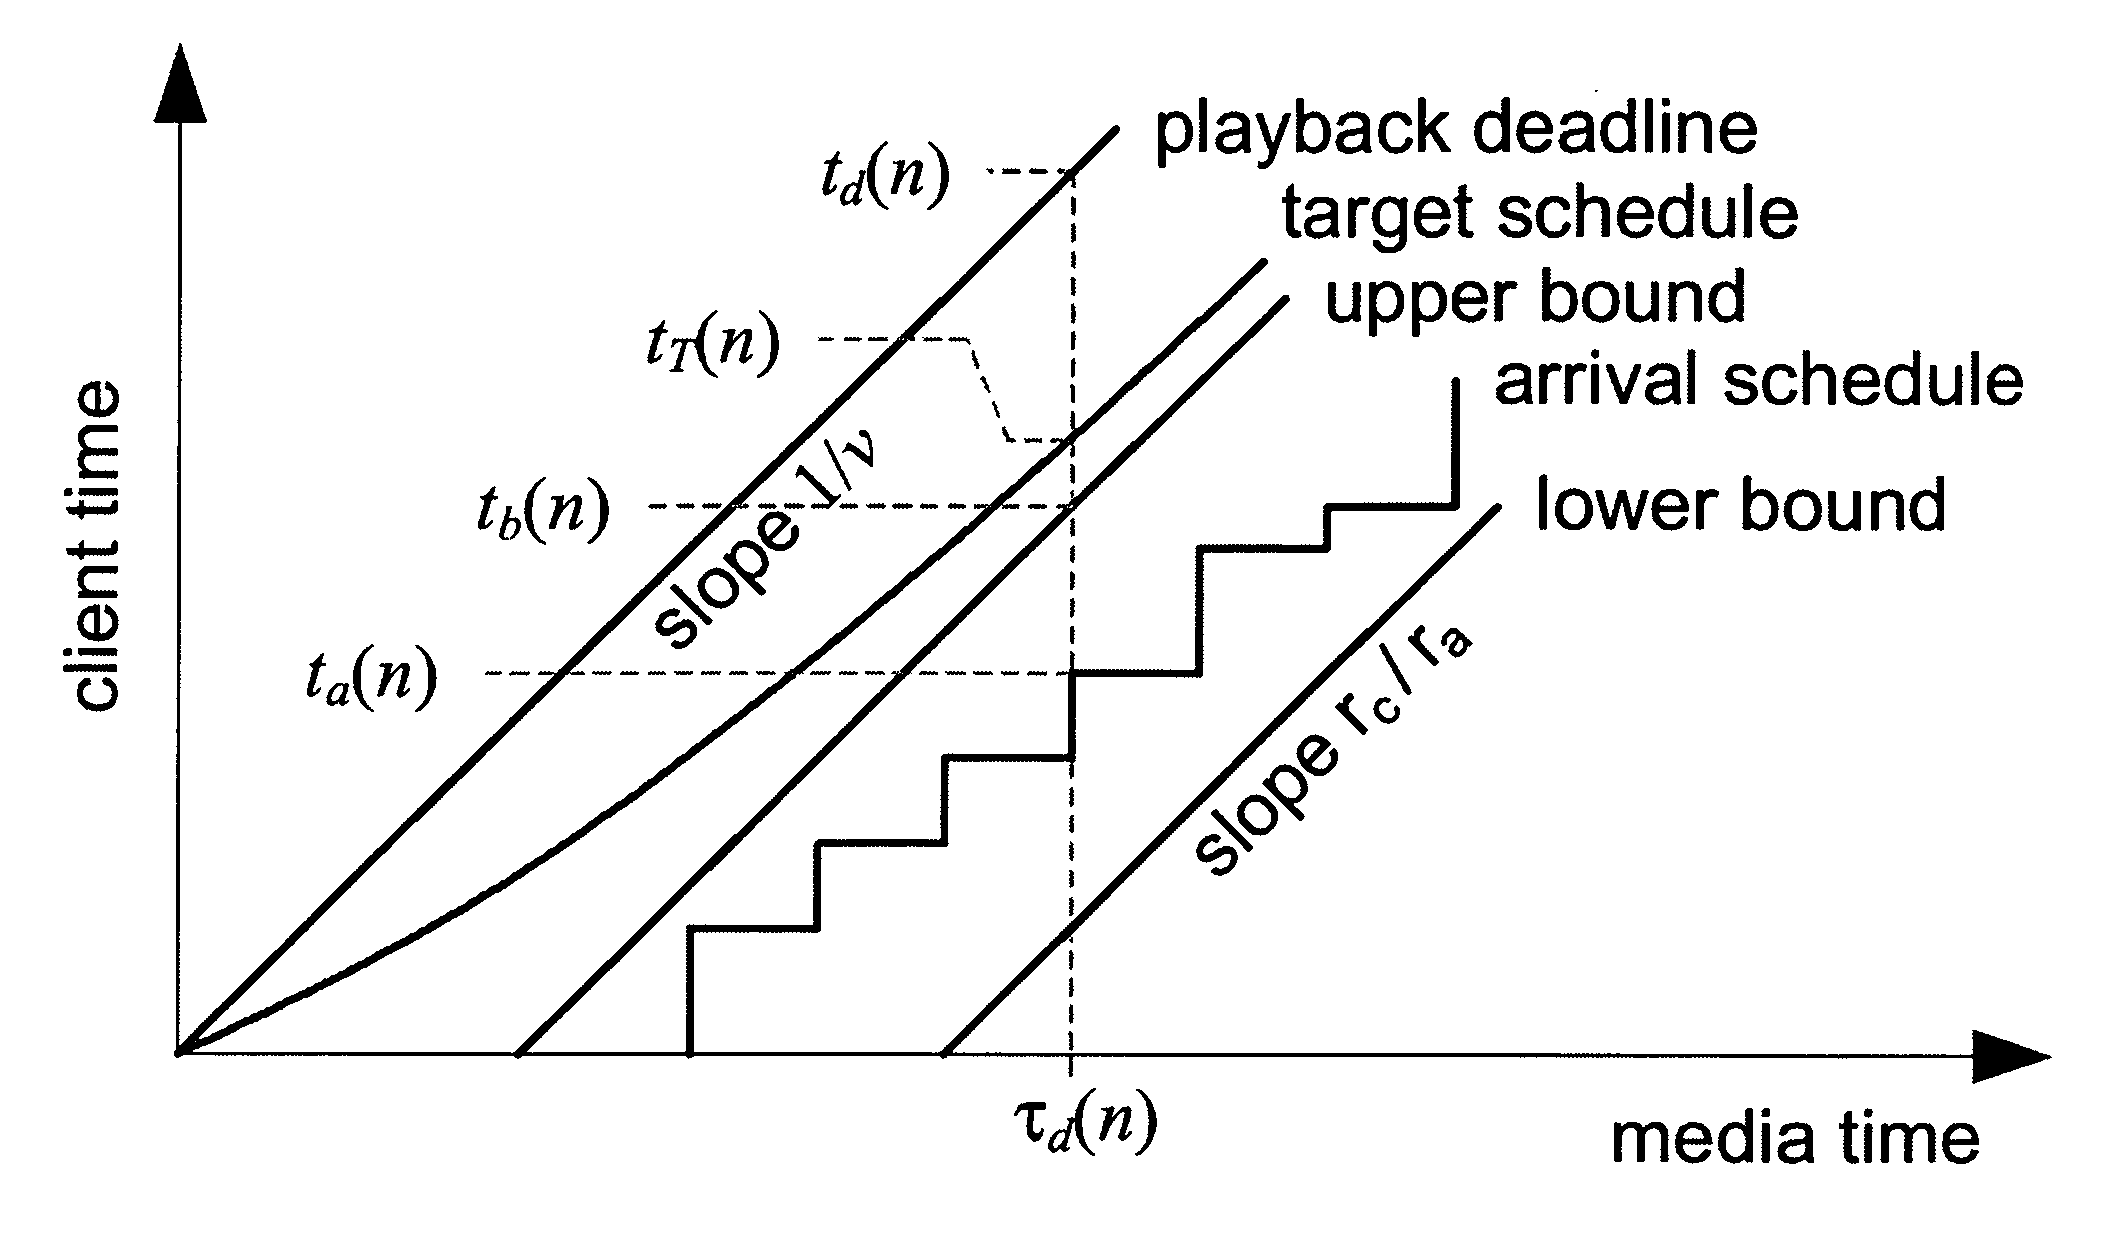 System and process for controlling the coding bit rate of streaming media data employing a linear quadratic control technique and leaky bucket model